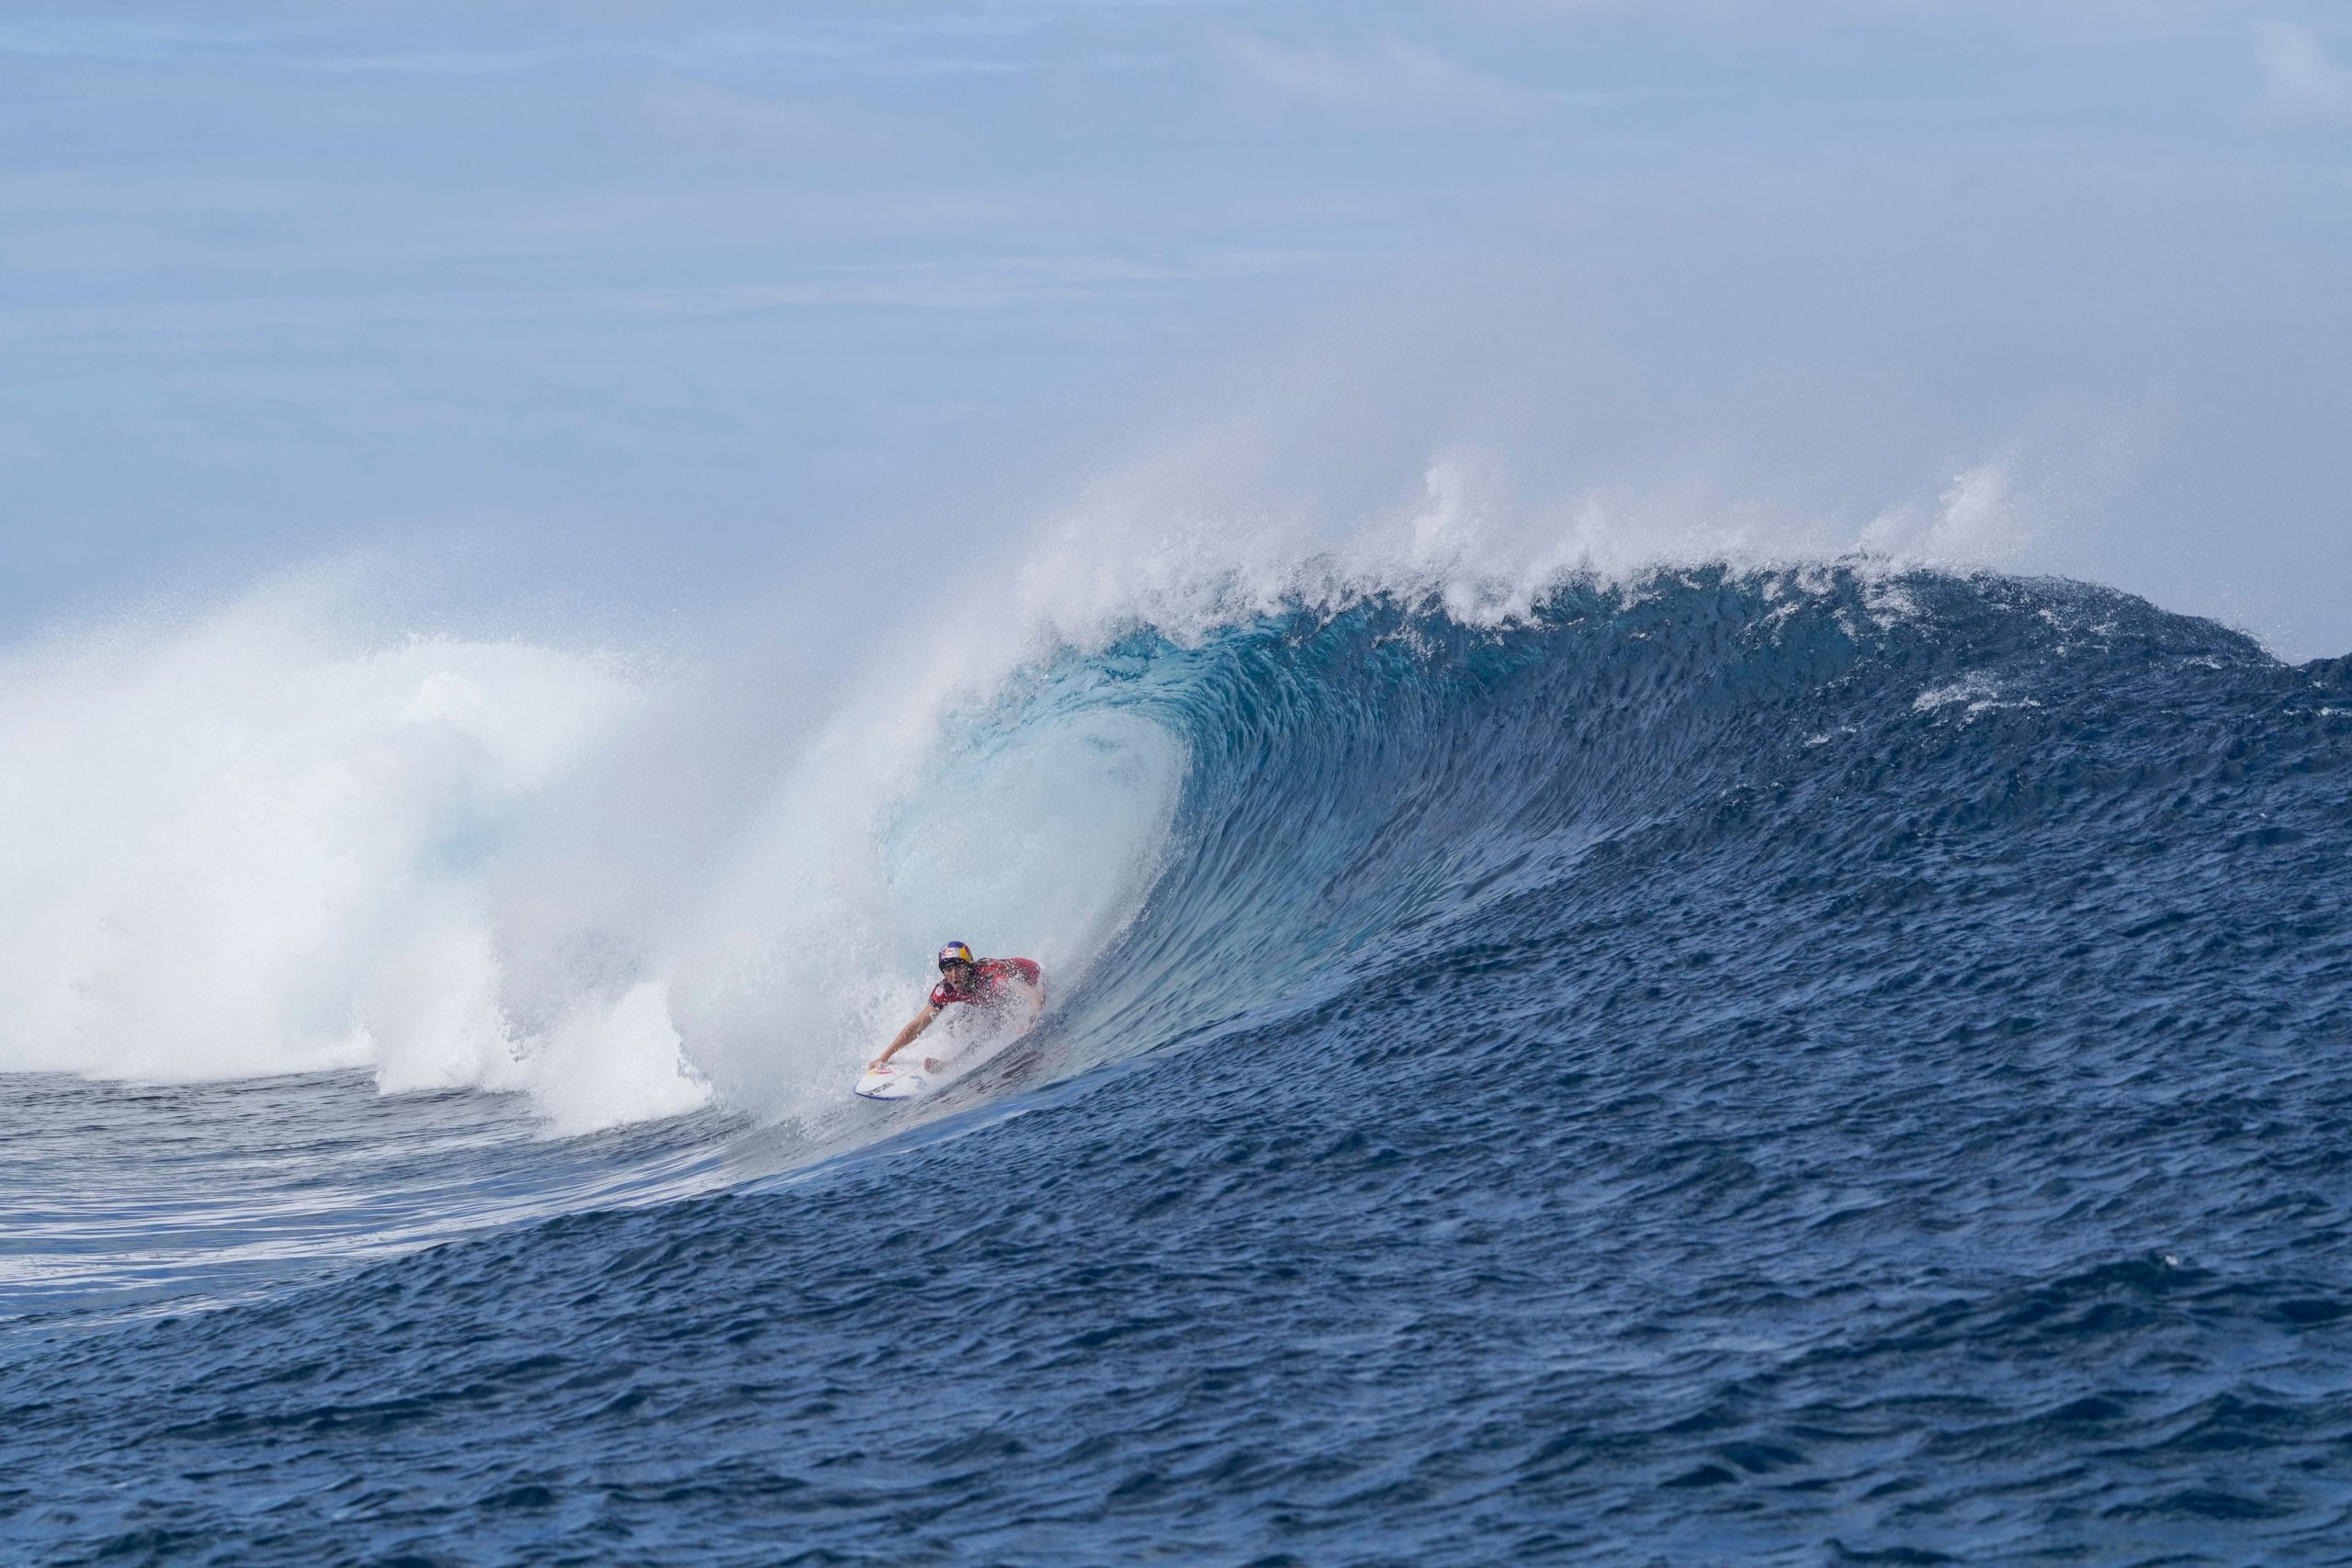 Australia's Molly Picklum rides a wave during the women's qurterfinals heat in the World Surf League (WSL) Tahiti pro competition, also a surfing test event for the Paris Olympic Games 2024, in Teahupo'o in Tahiti, French Polynesia on August 16, 2023. (Photo by Jerome Brouillet / AFP) (Photo by JEROME BROUILLET/AFP via Getty Images)